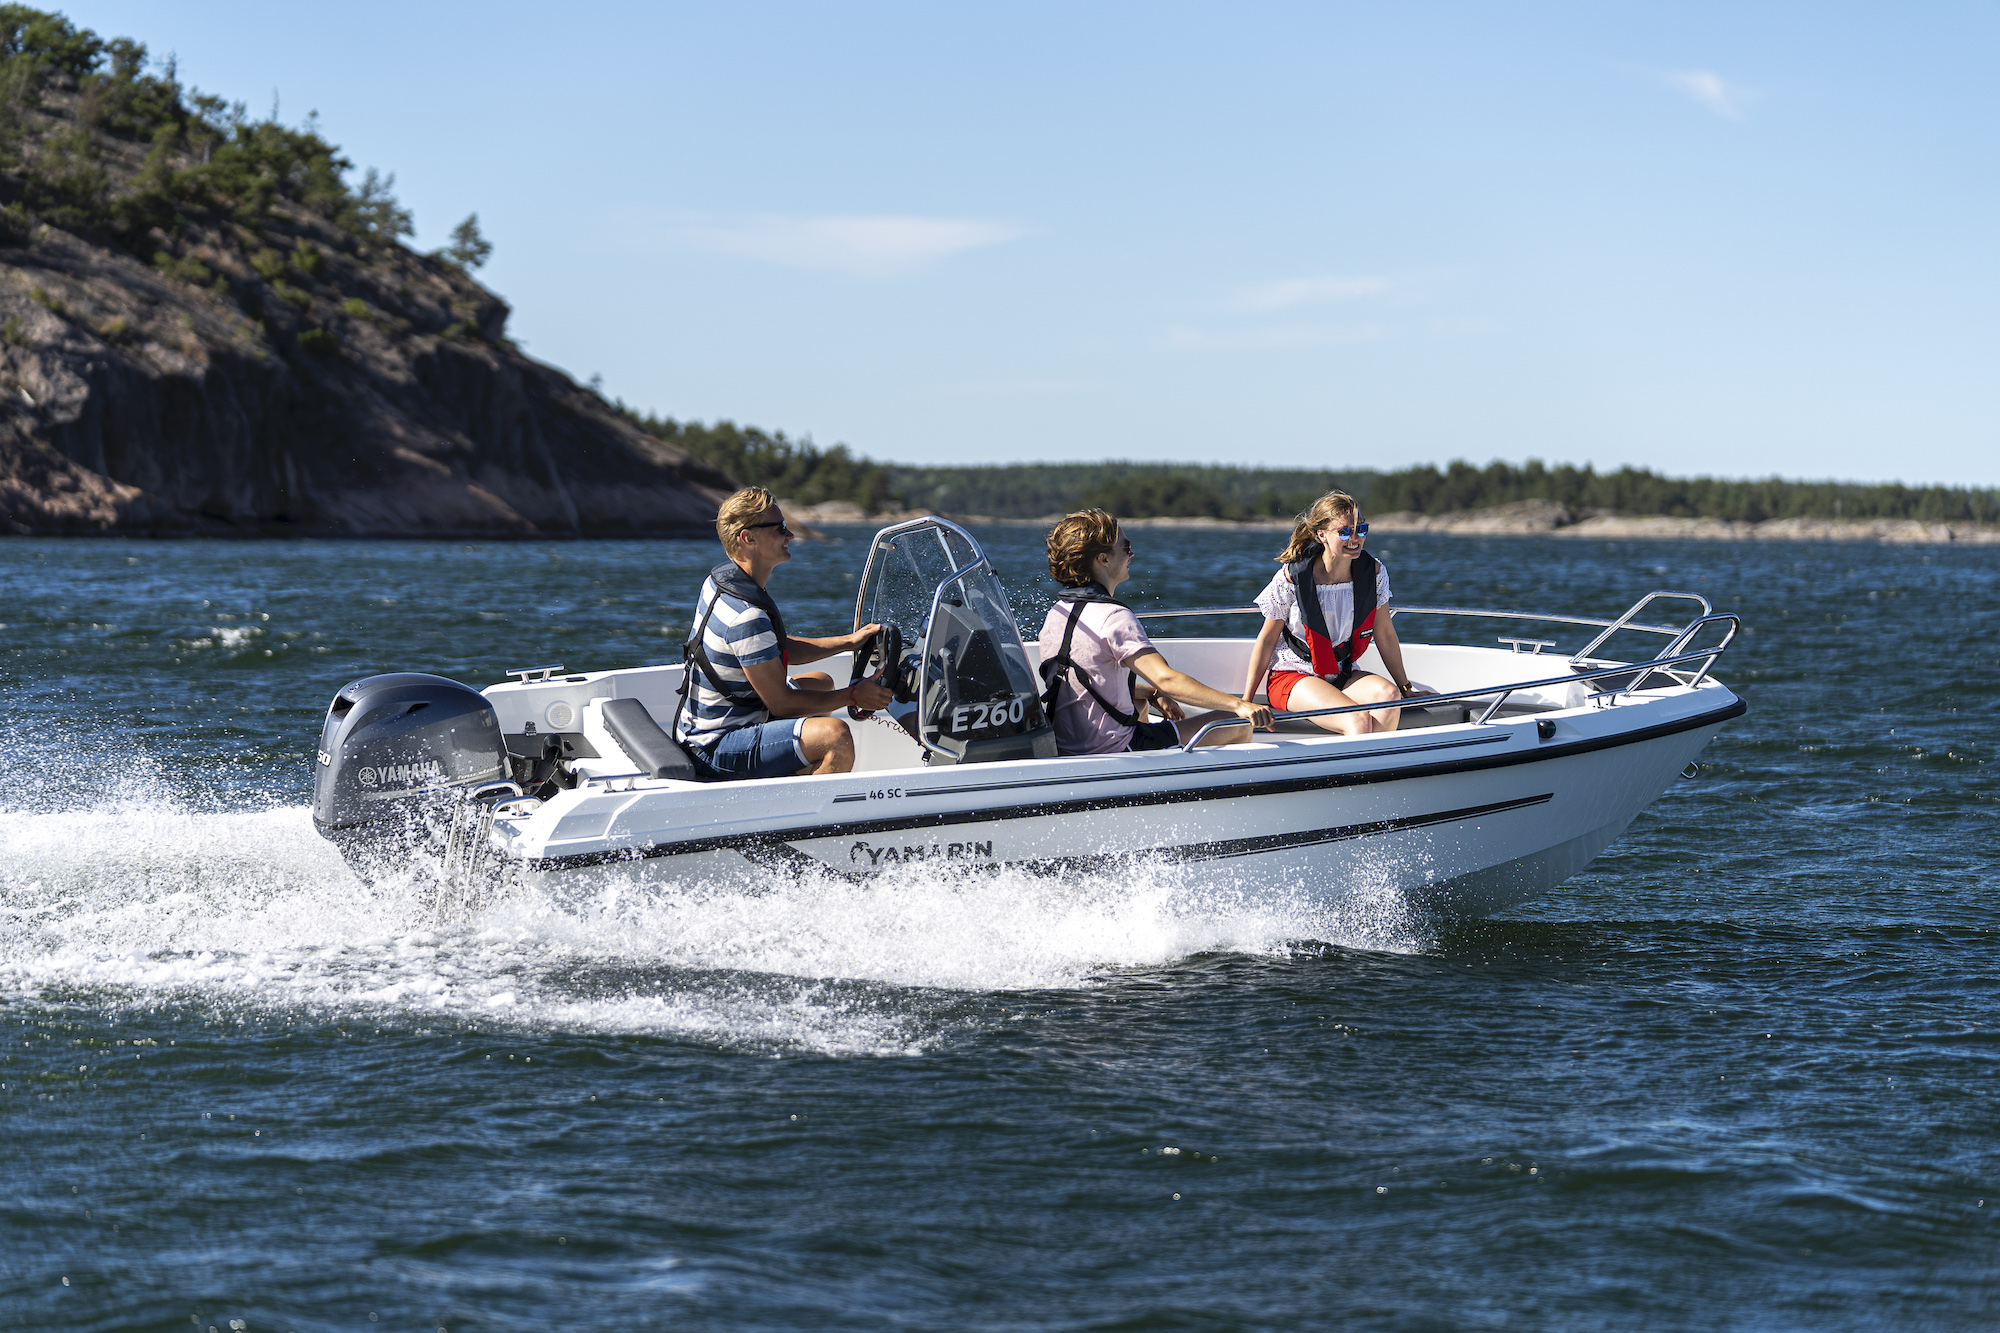 Yamarin 46 SC will be displayed at the Tallinn Boat Show - Meremess 20